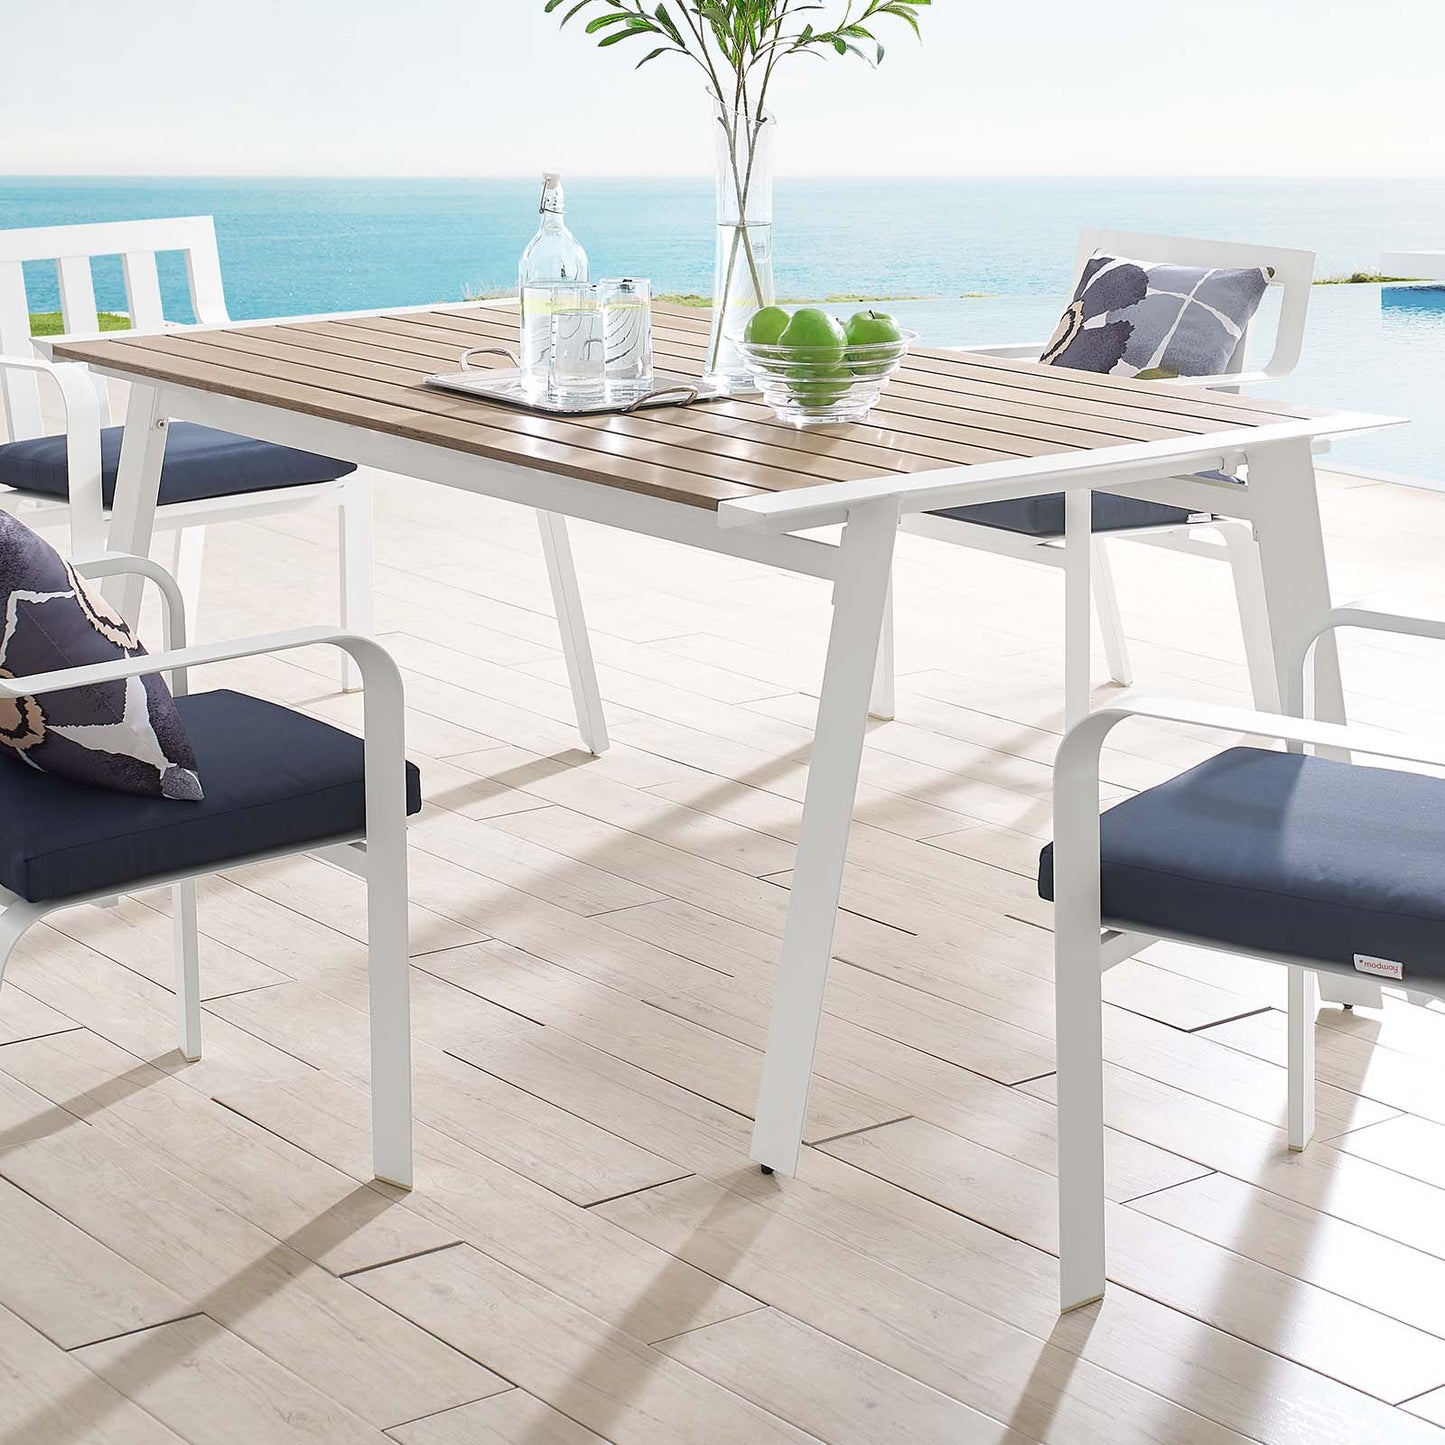 Roanoke 73" Outdoor Patio Aluminum Dining Table White Natural EEI-3572-WHI-NAT